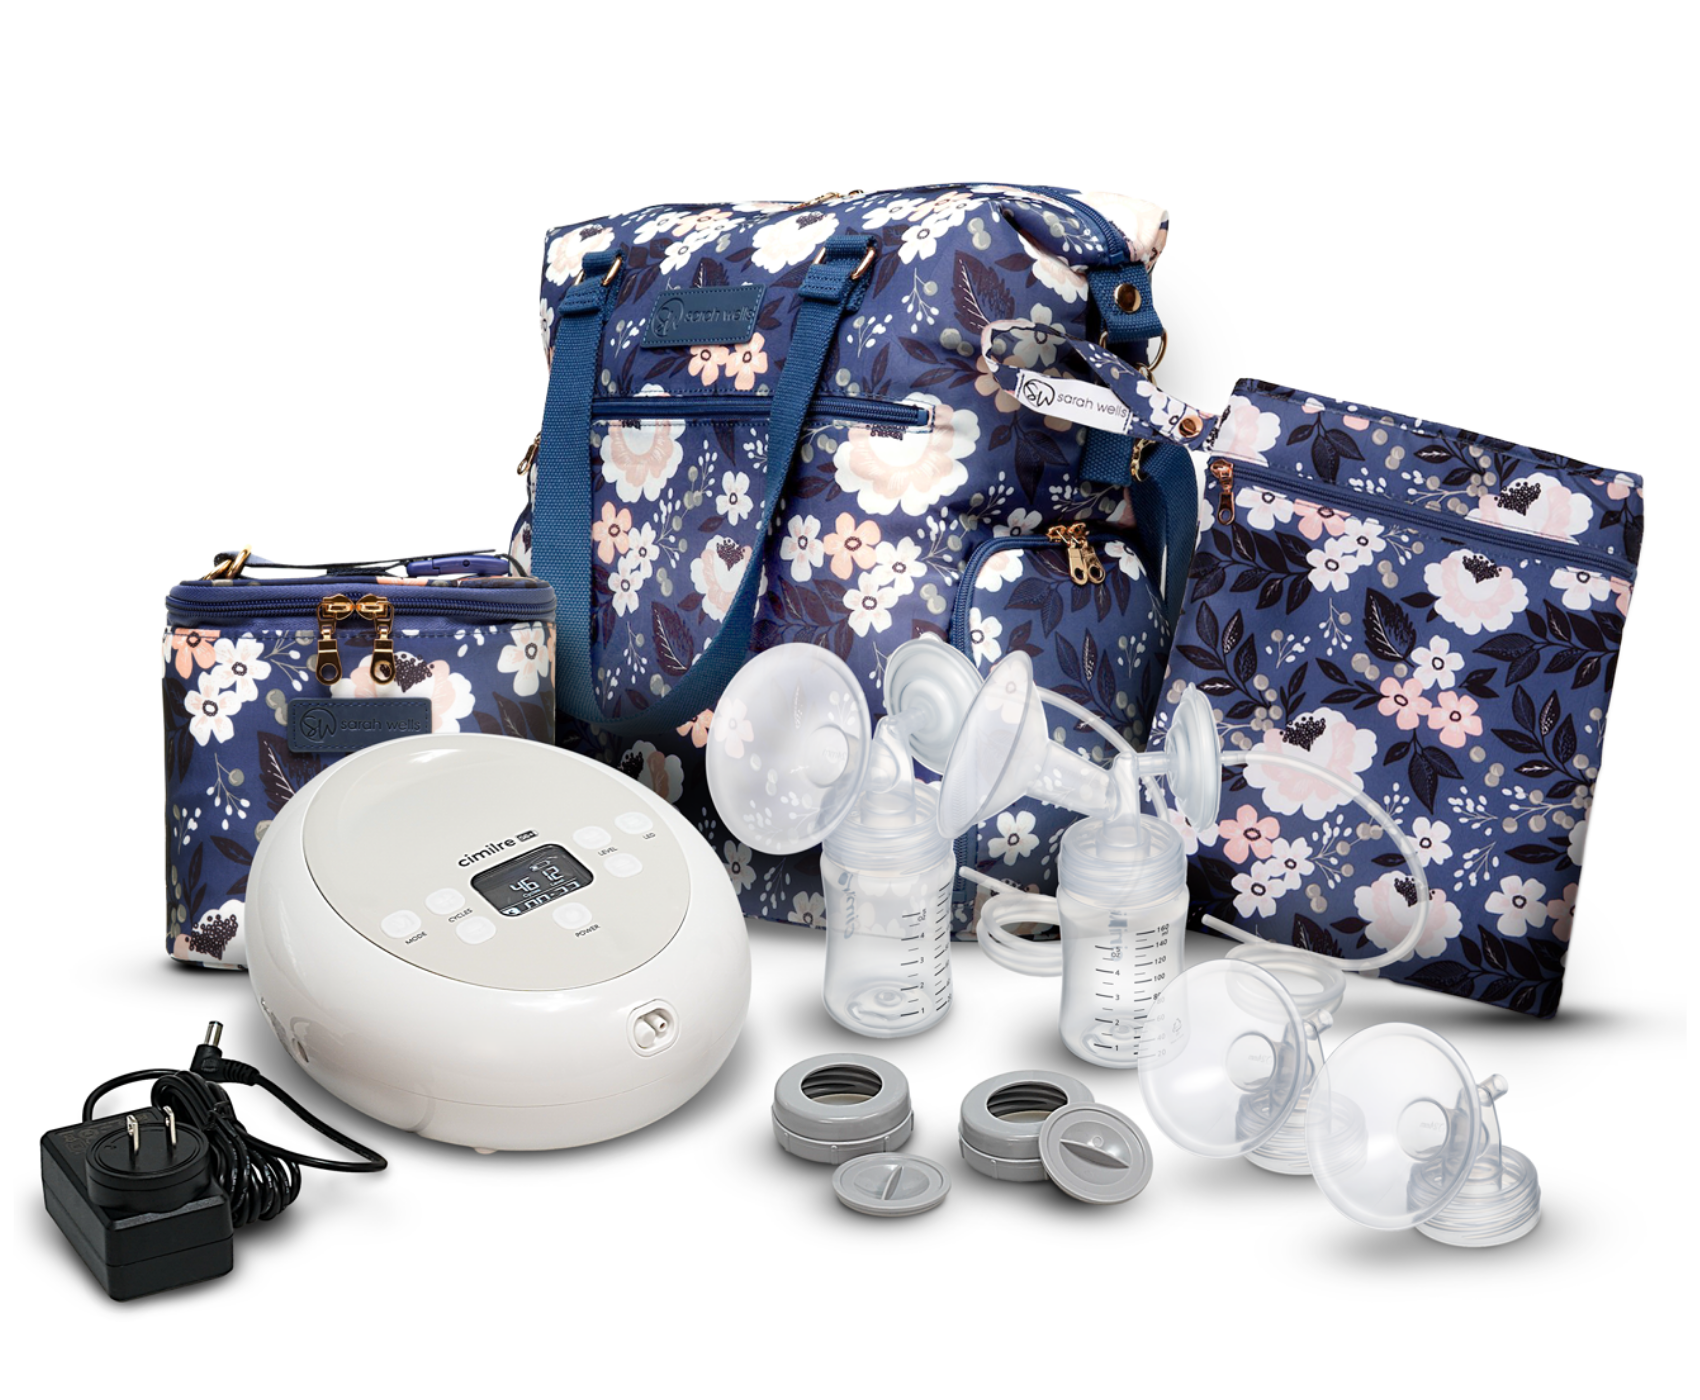 Spectra S2 Plus Breast Pump - Acelleron Medical Products